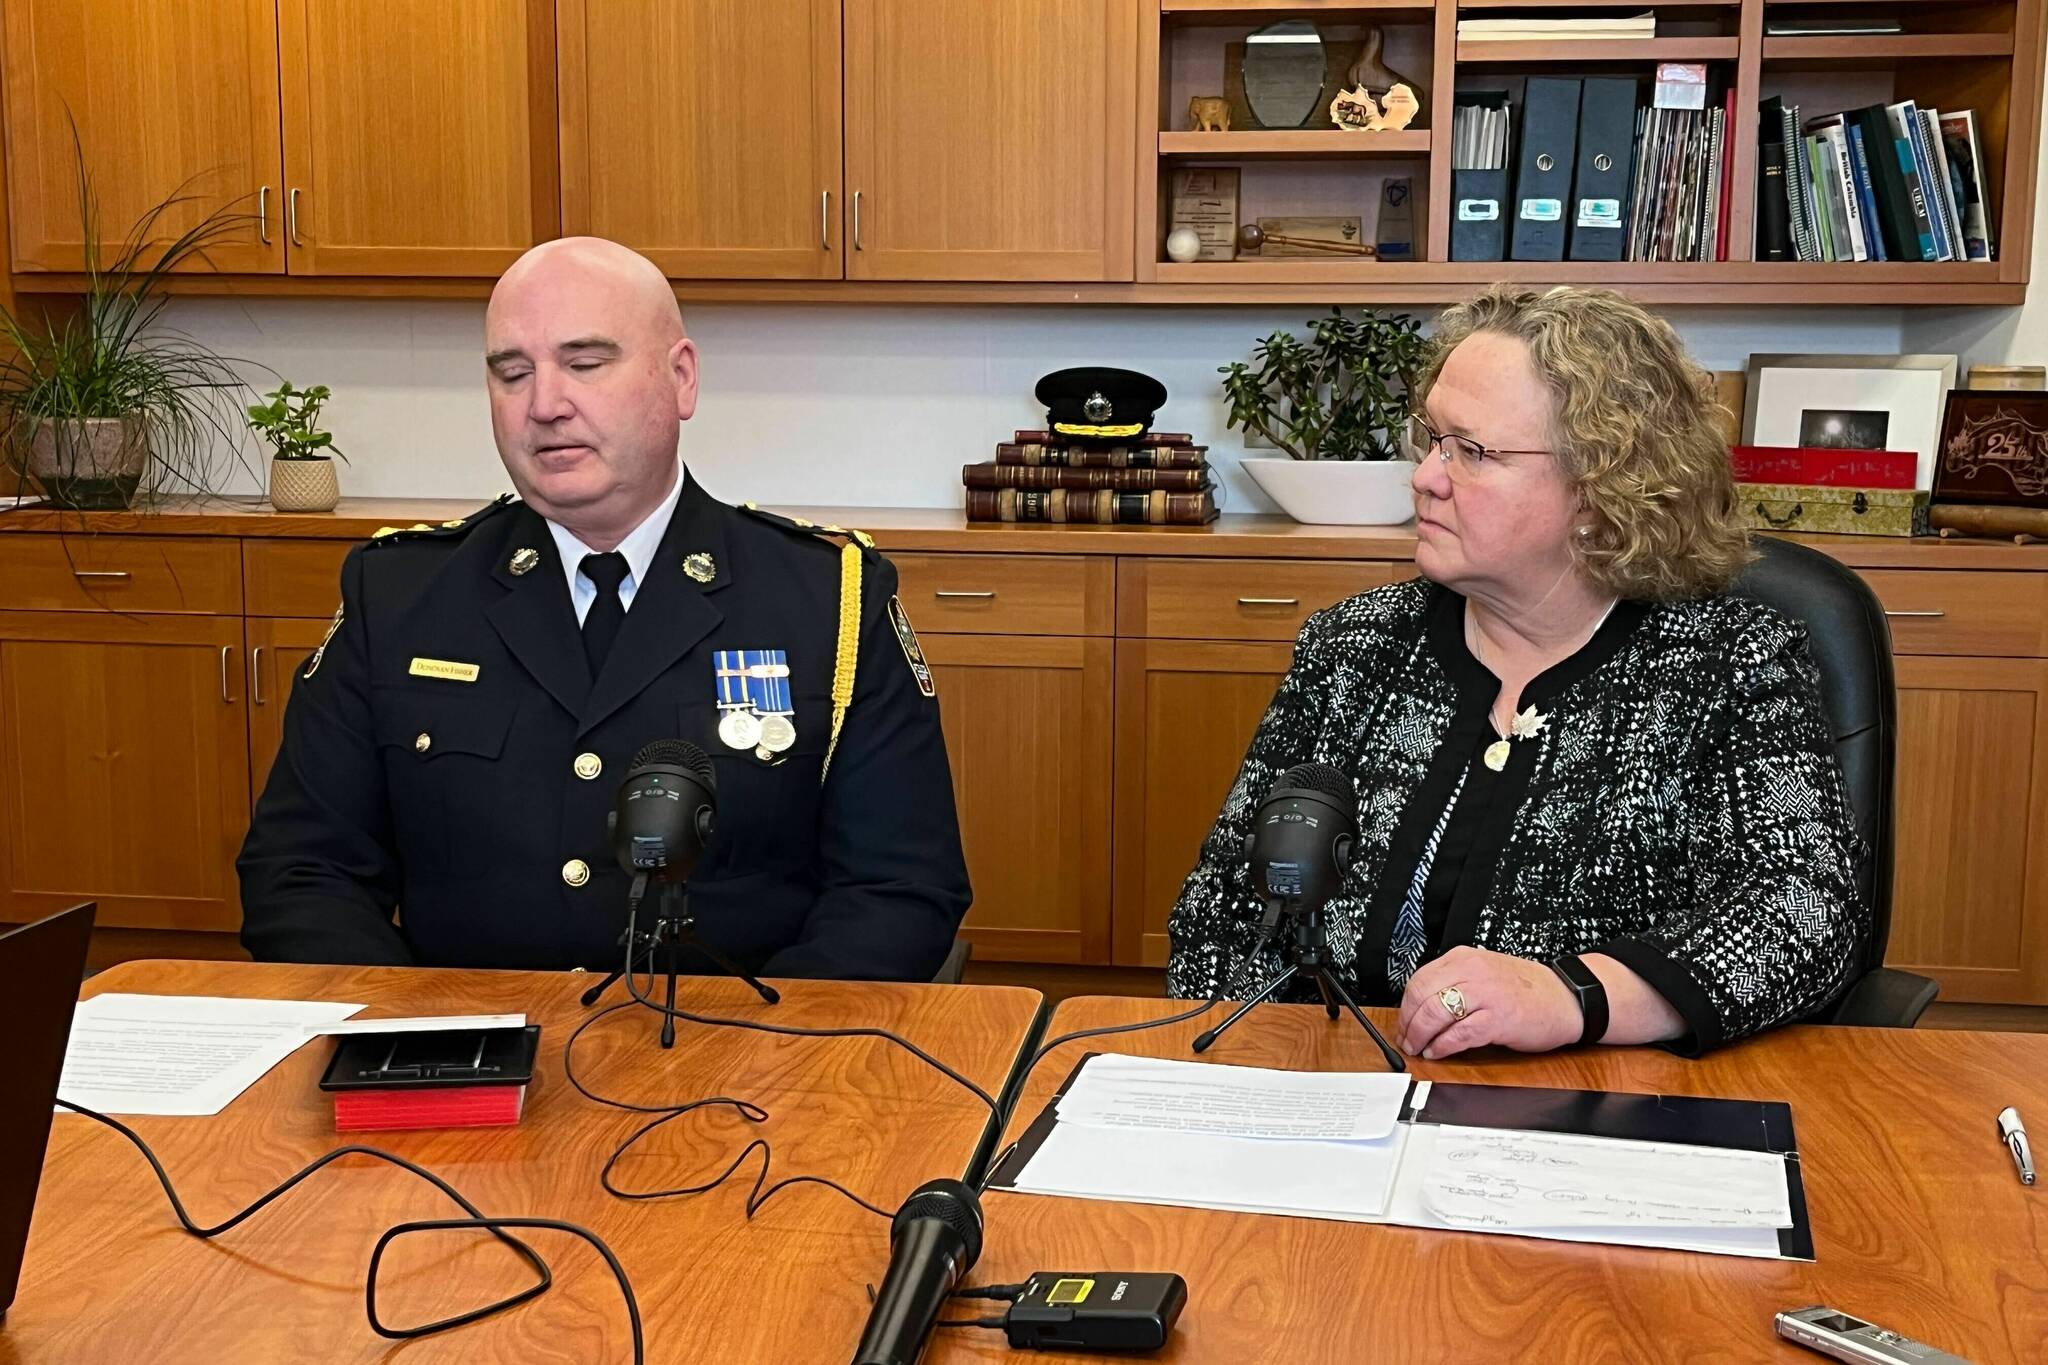 Nelson Police Chief Donovan Fisher and Mayor Janice Morrison at a news conference on Jan. 10, 2023, after an avalanche near Kaslo killed one officer and injured another. Photo: Tyler Harper